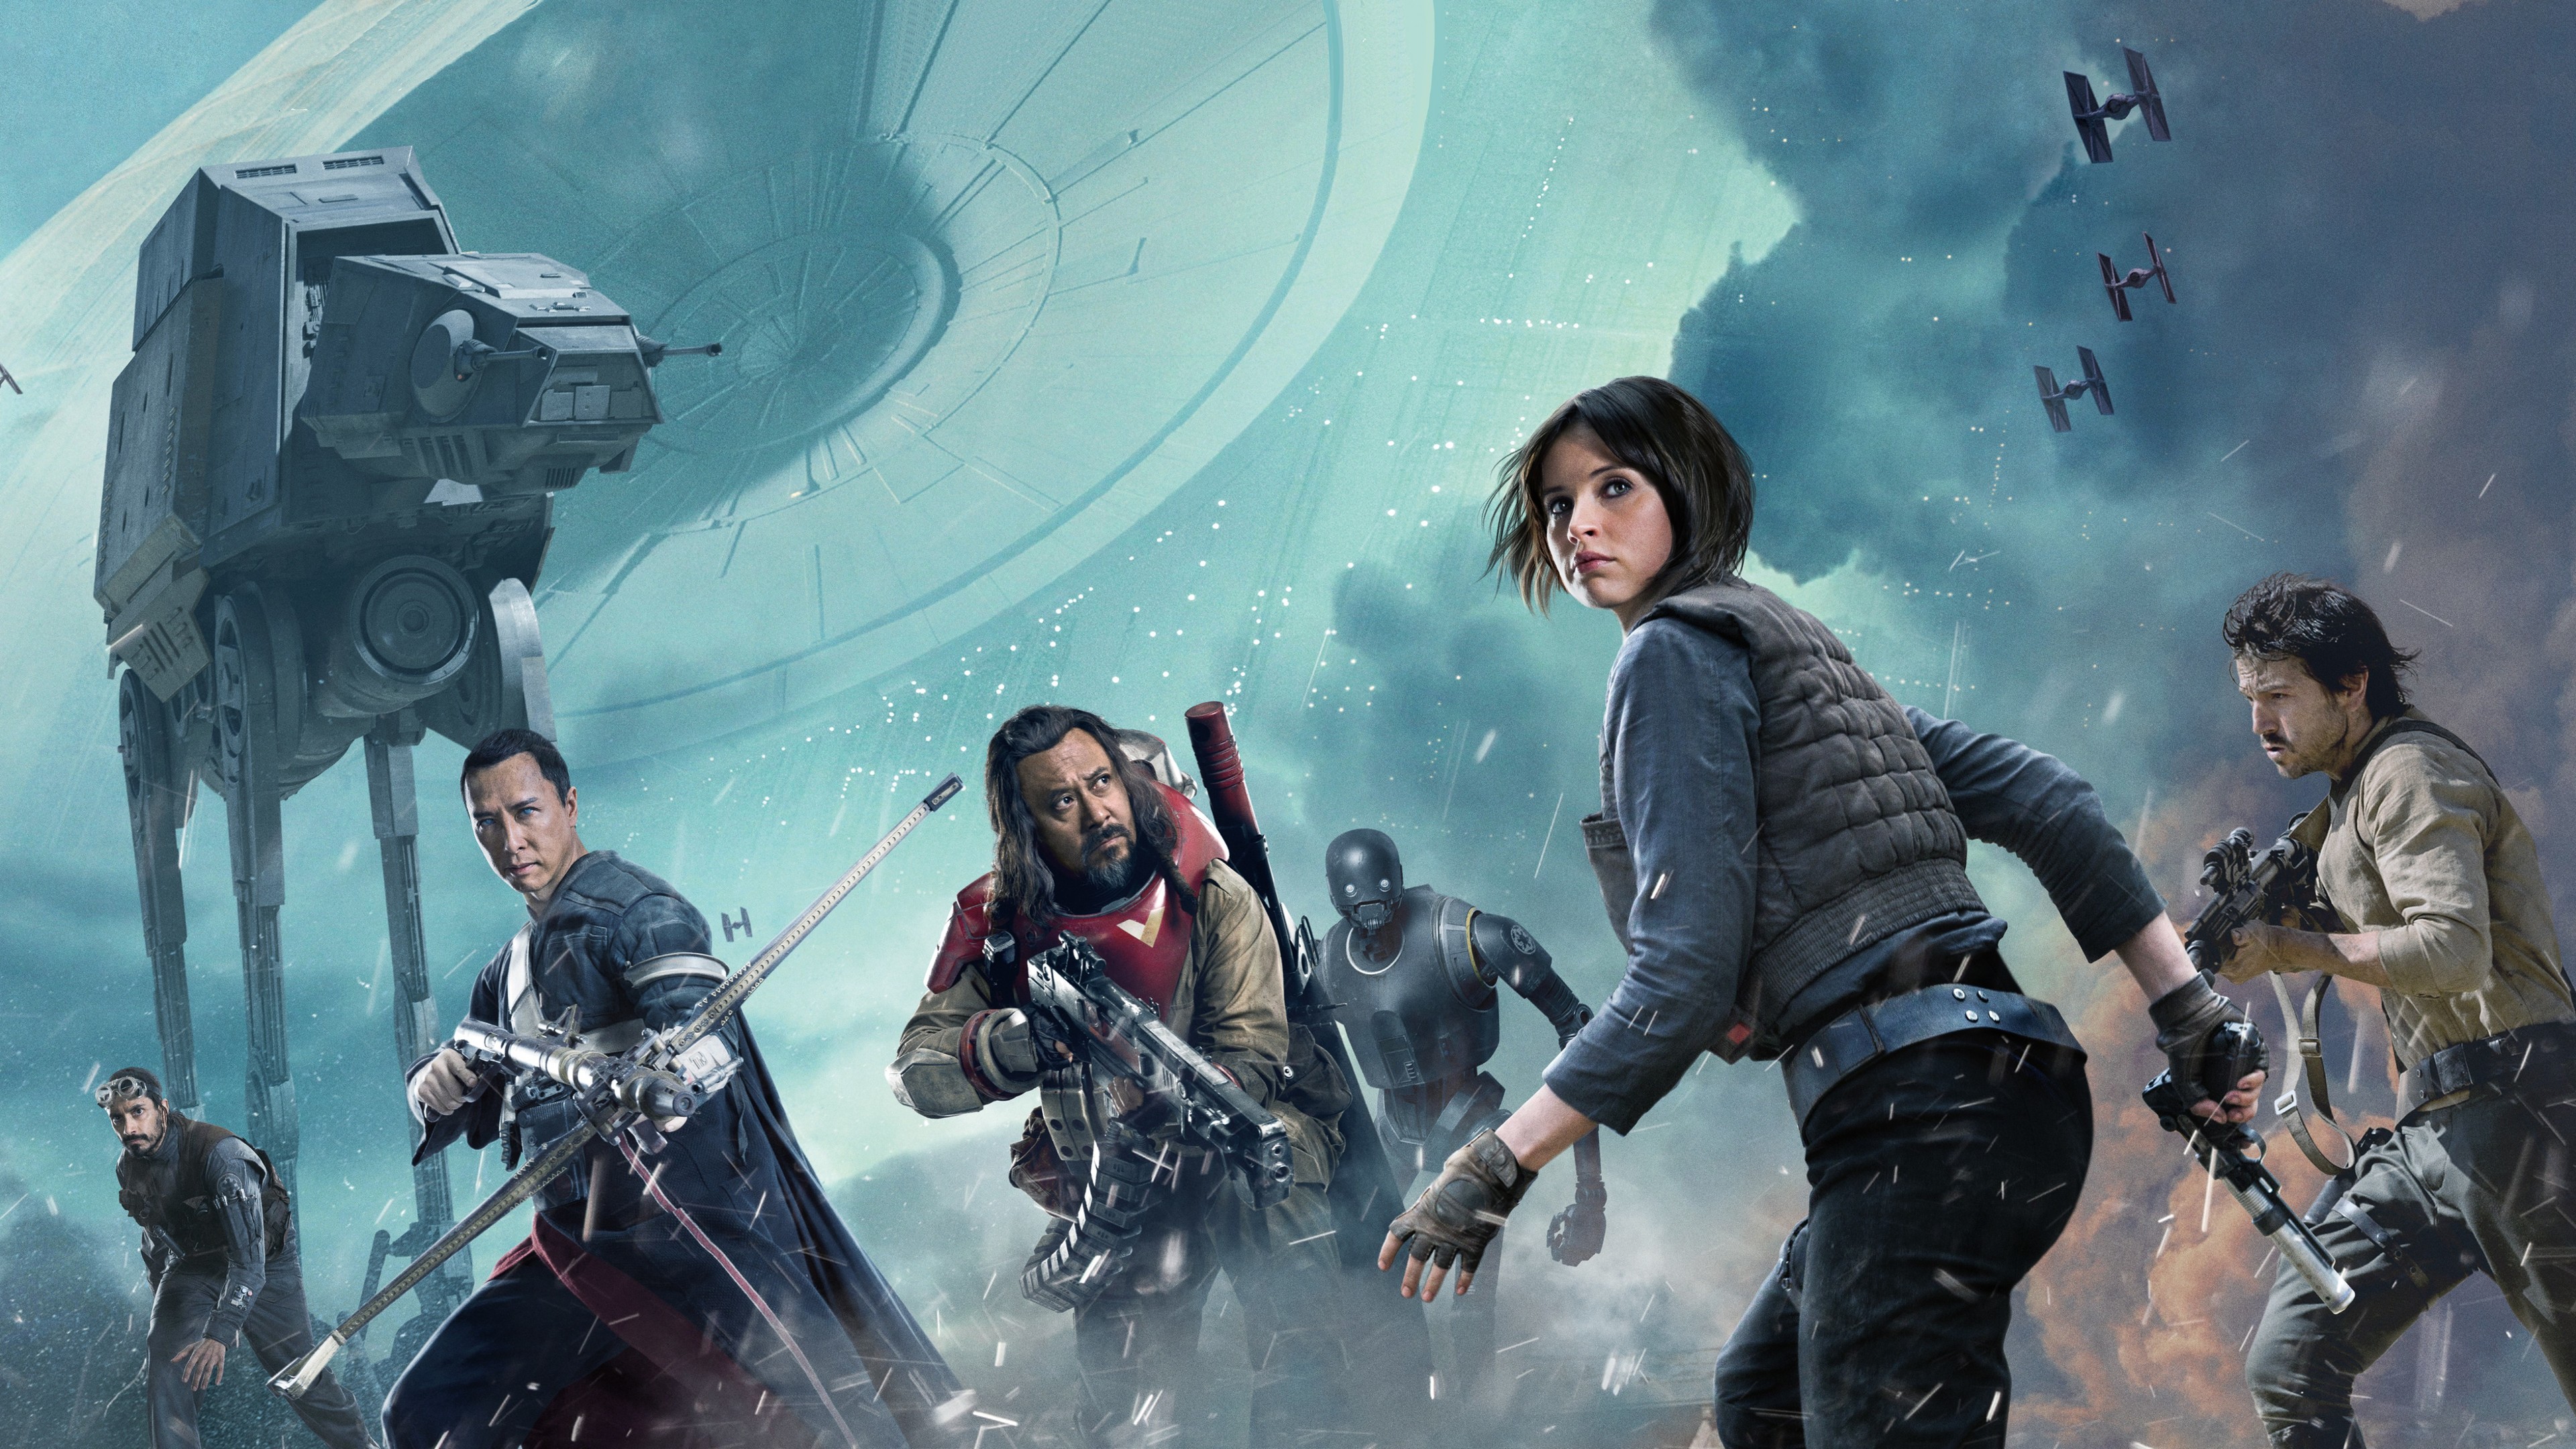 rogue one a star wars story 5k 1536400668 - Rogue One A Star Wars Story 5k - star wars wallpapers, rogue one a star wars story wallpapers, movies wallpapers, 5k wallpapers, 2016 movies wallpapers